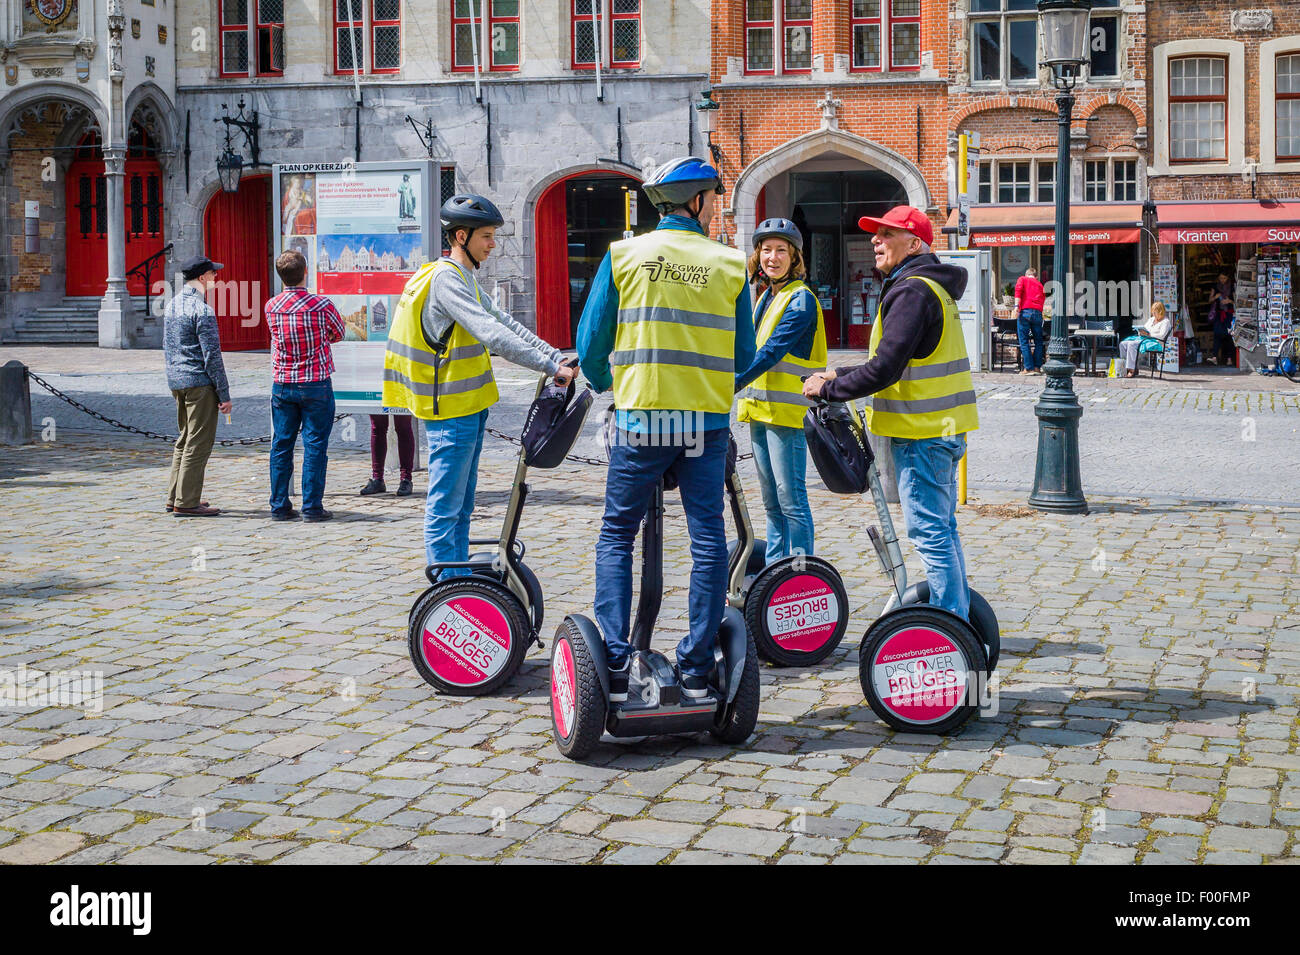 A group of people using 'Segway' two wheeled transport to take a tourist trip around Brugge, Belgium. Stock Photo